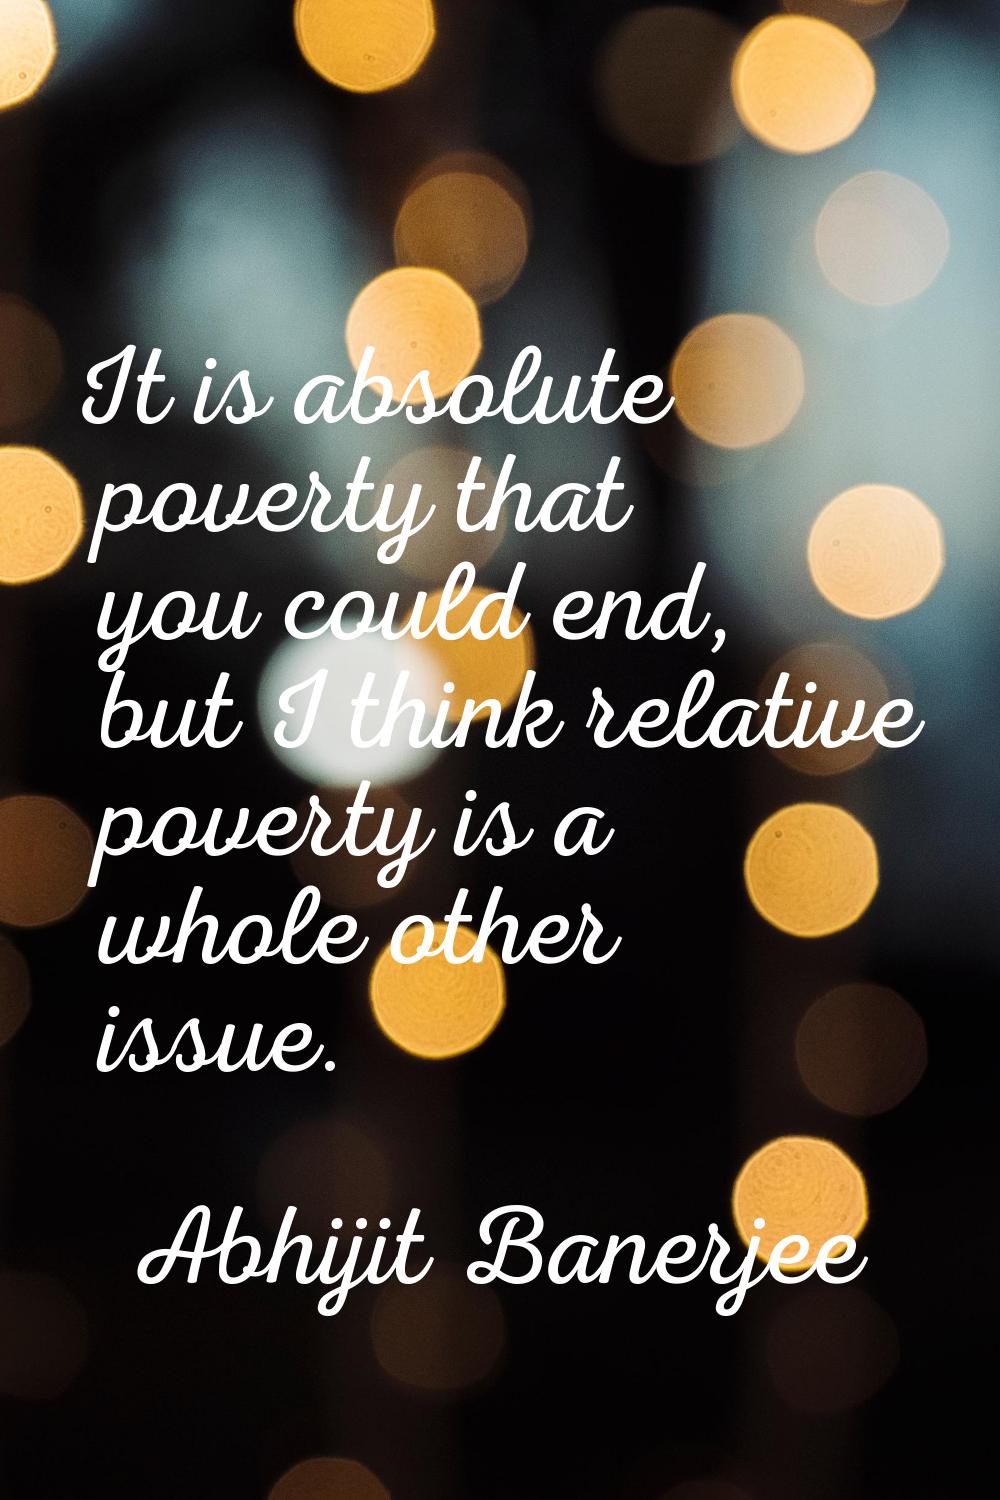 It is absolute poverty that you could end, but I think relative poverty is a whole other issue.